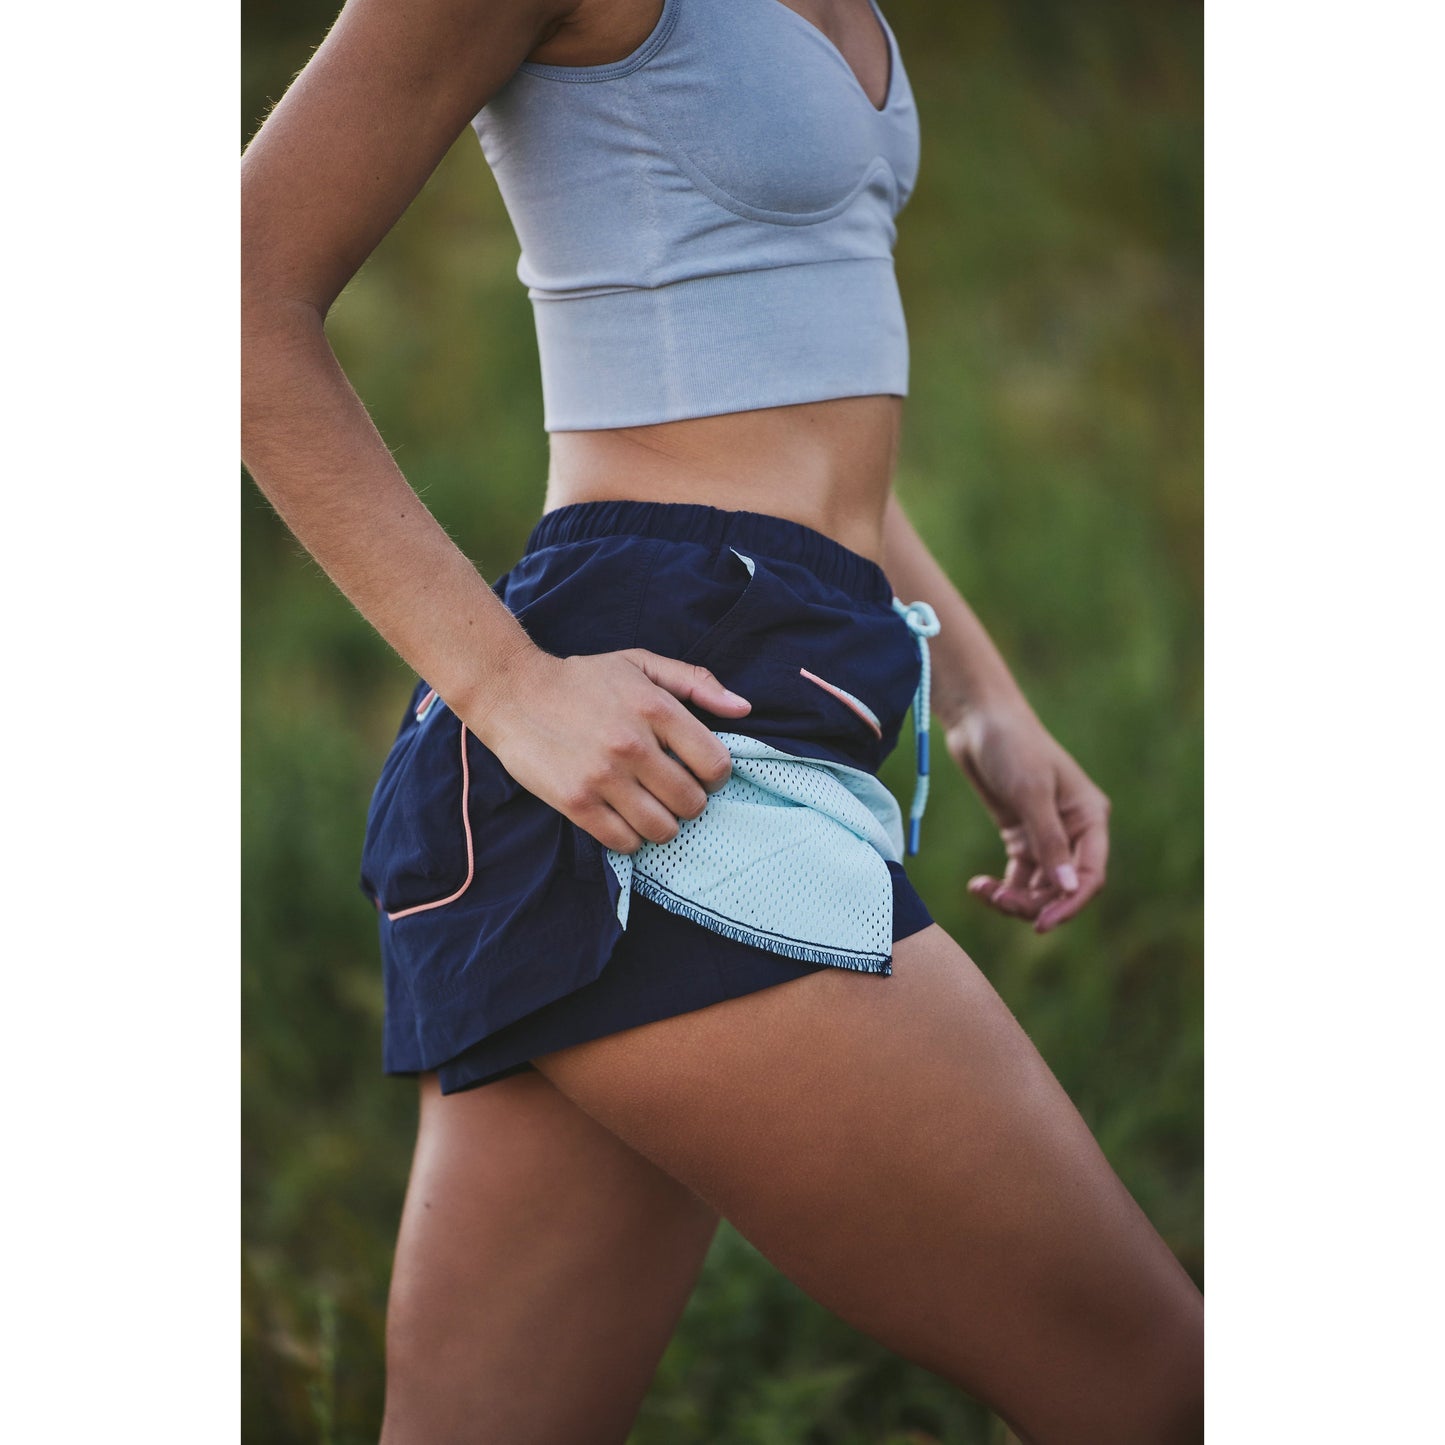 A woman runner in a gray sports bra and navy shorts putting a smartphone into a thigh pocket against a grassy background wearing the Outskirts Skort from Free People Movement.